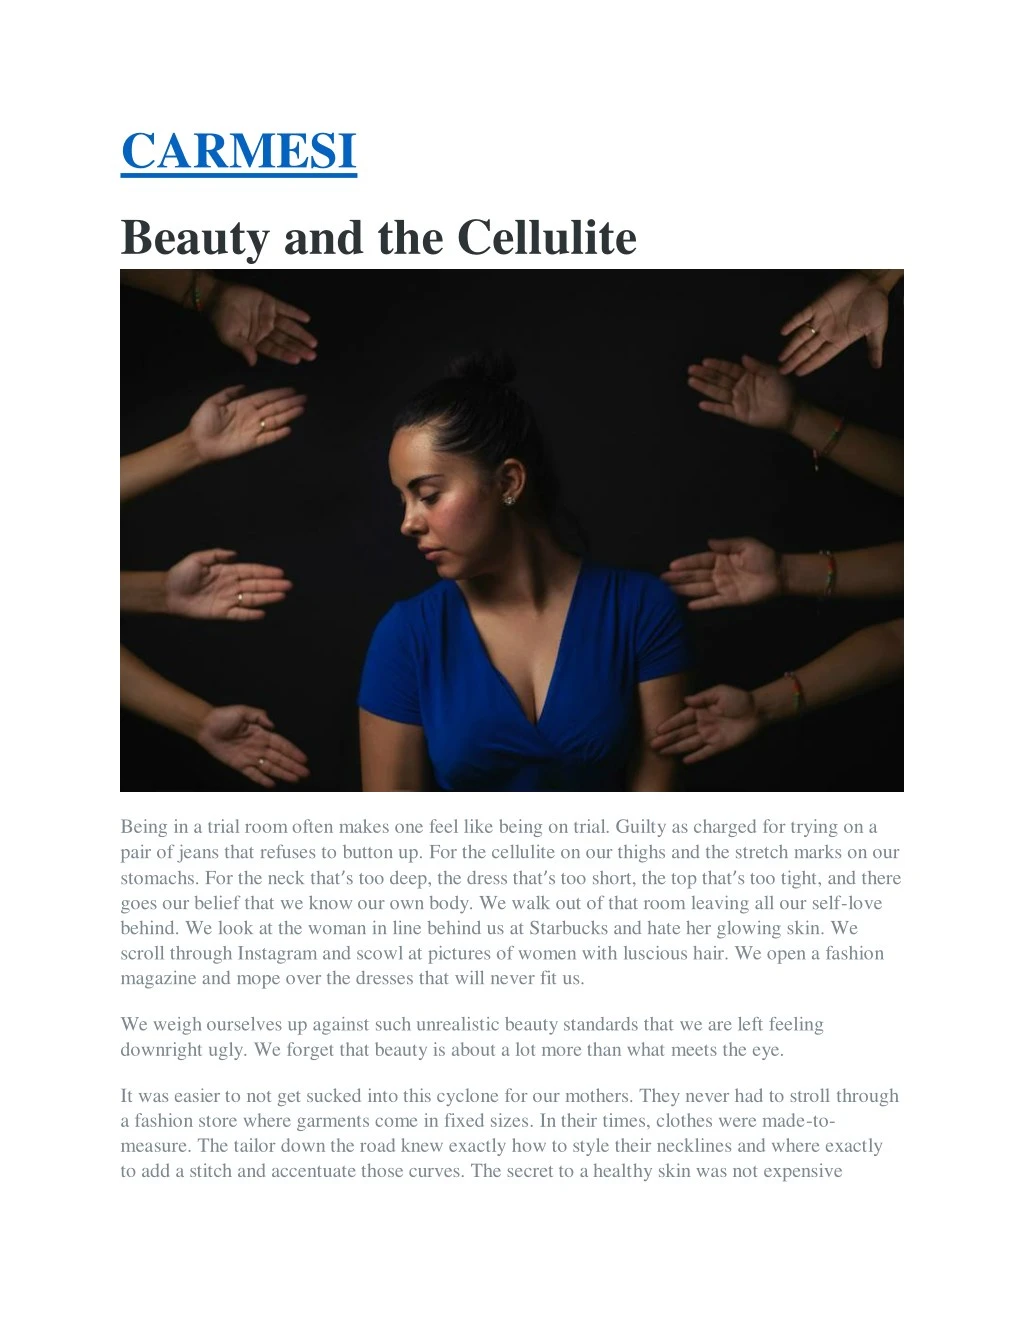 carmesi beauty and the cellulite